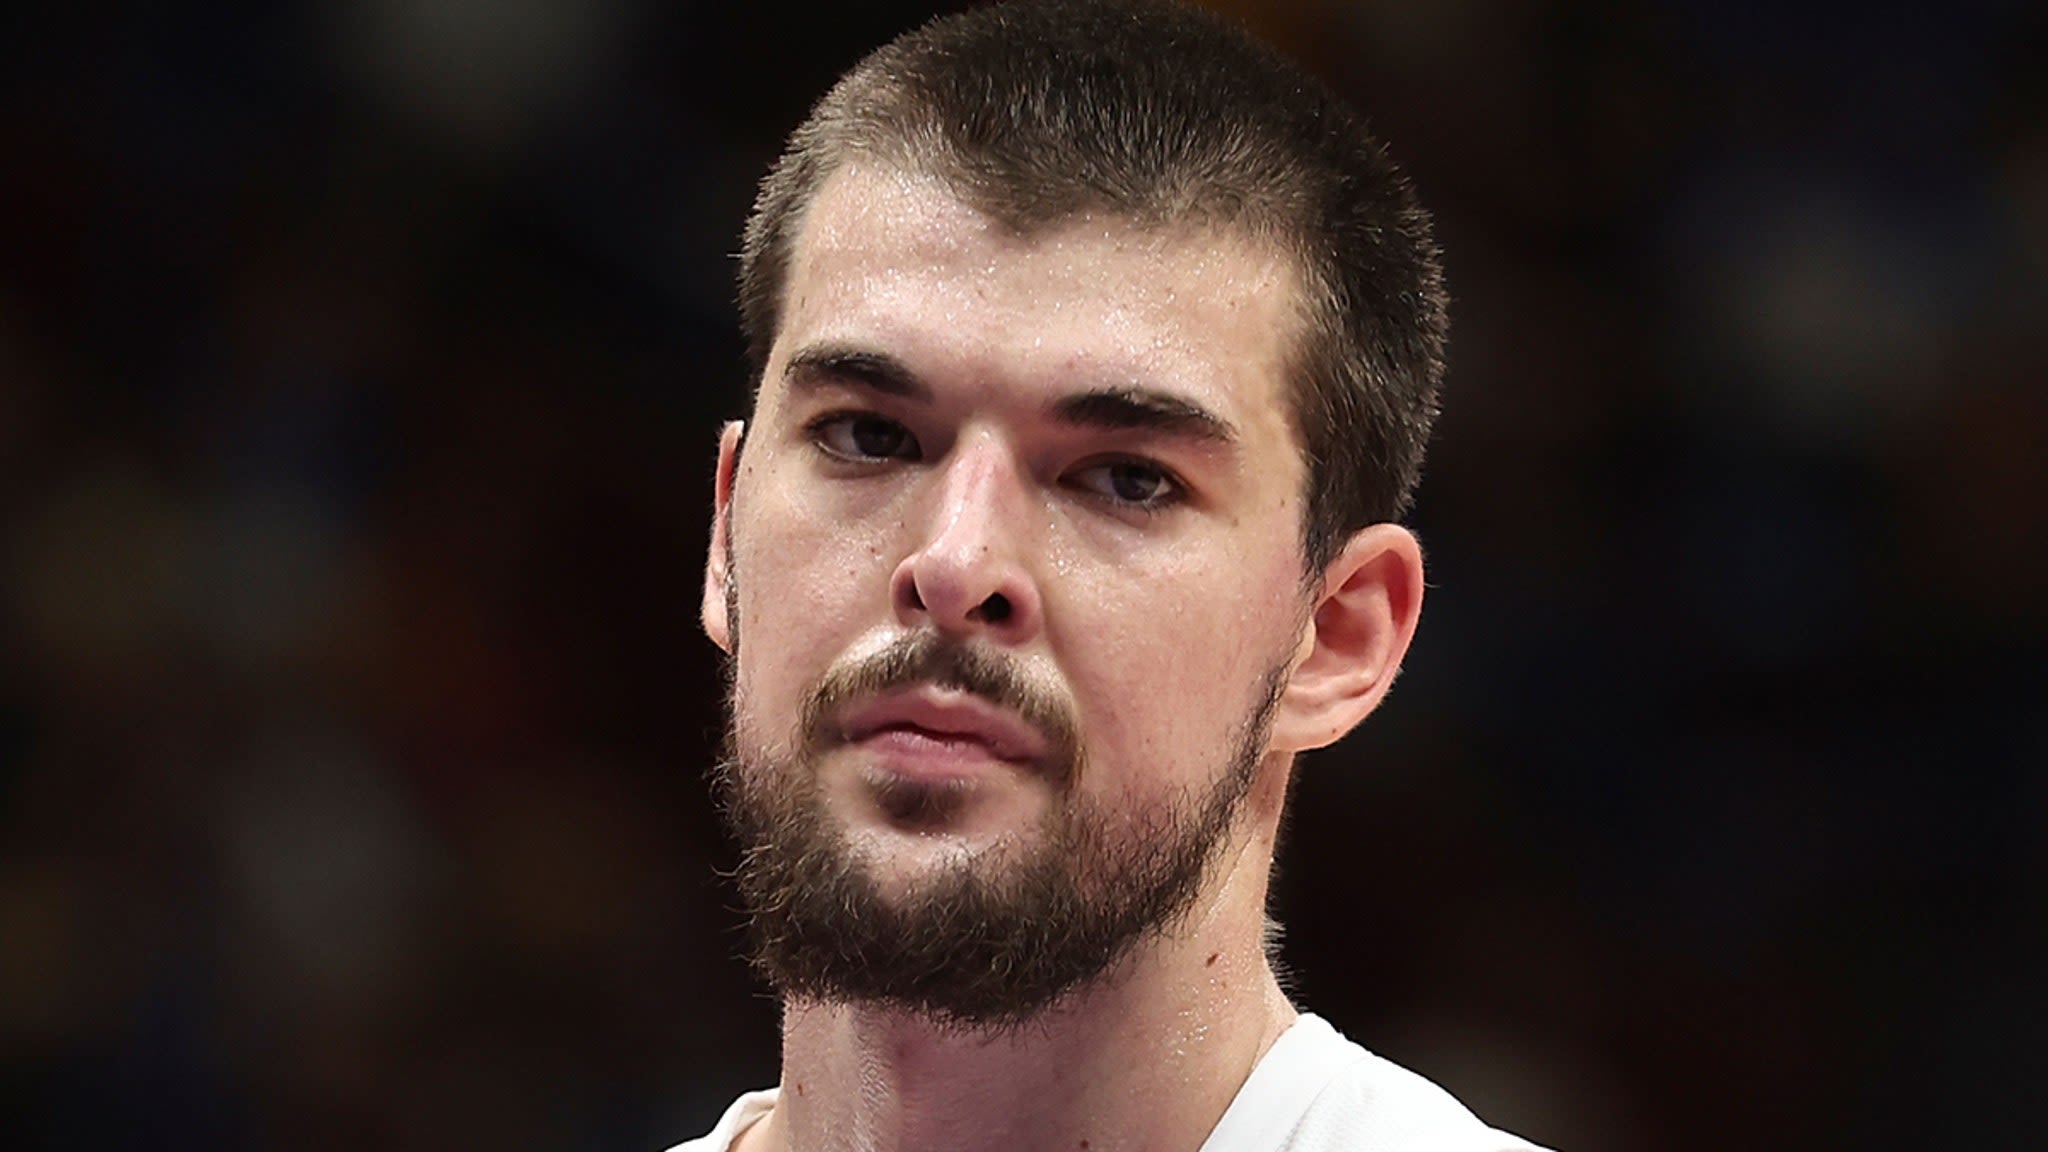 Clippers' Ivica Zubac's L.A. Home Burglarized, Police Looking For Thieves